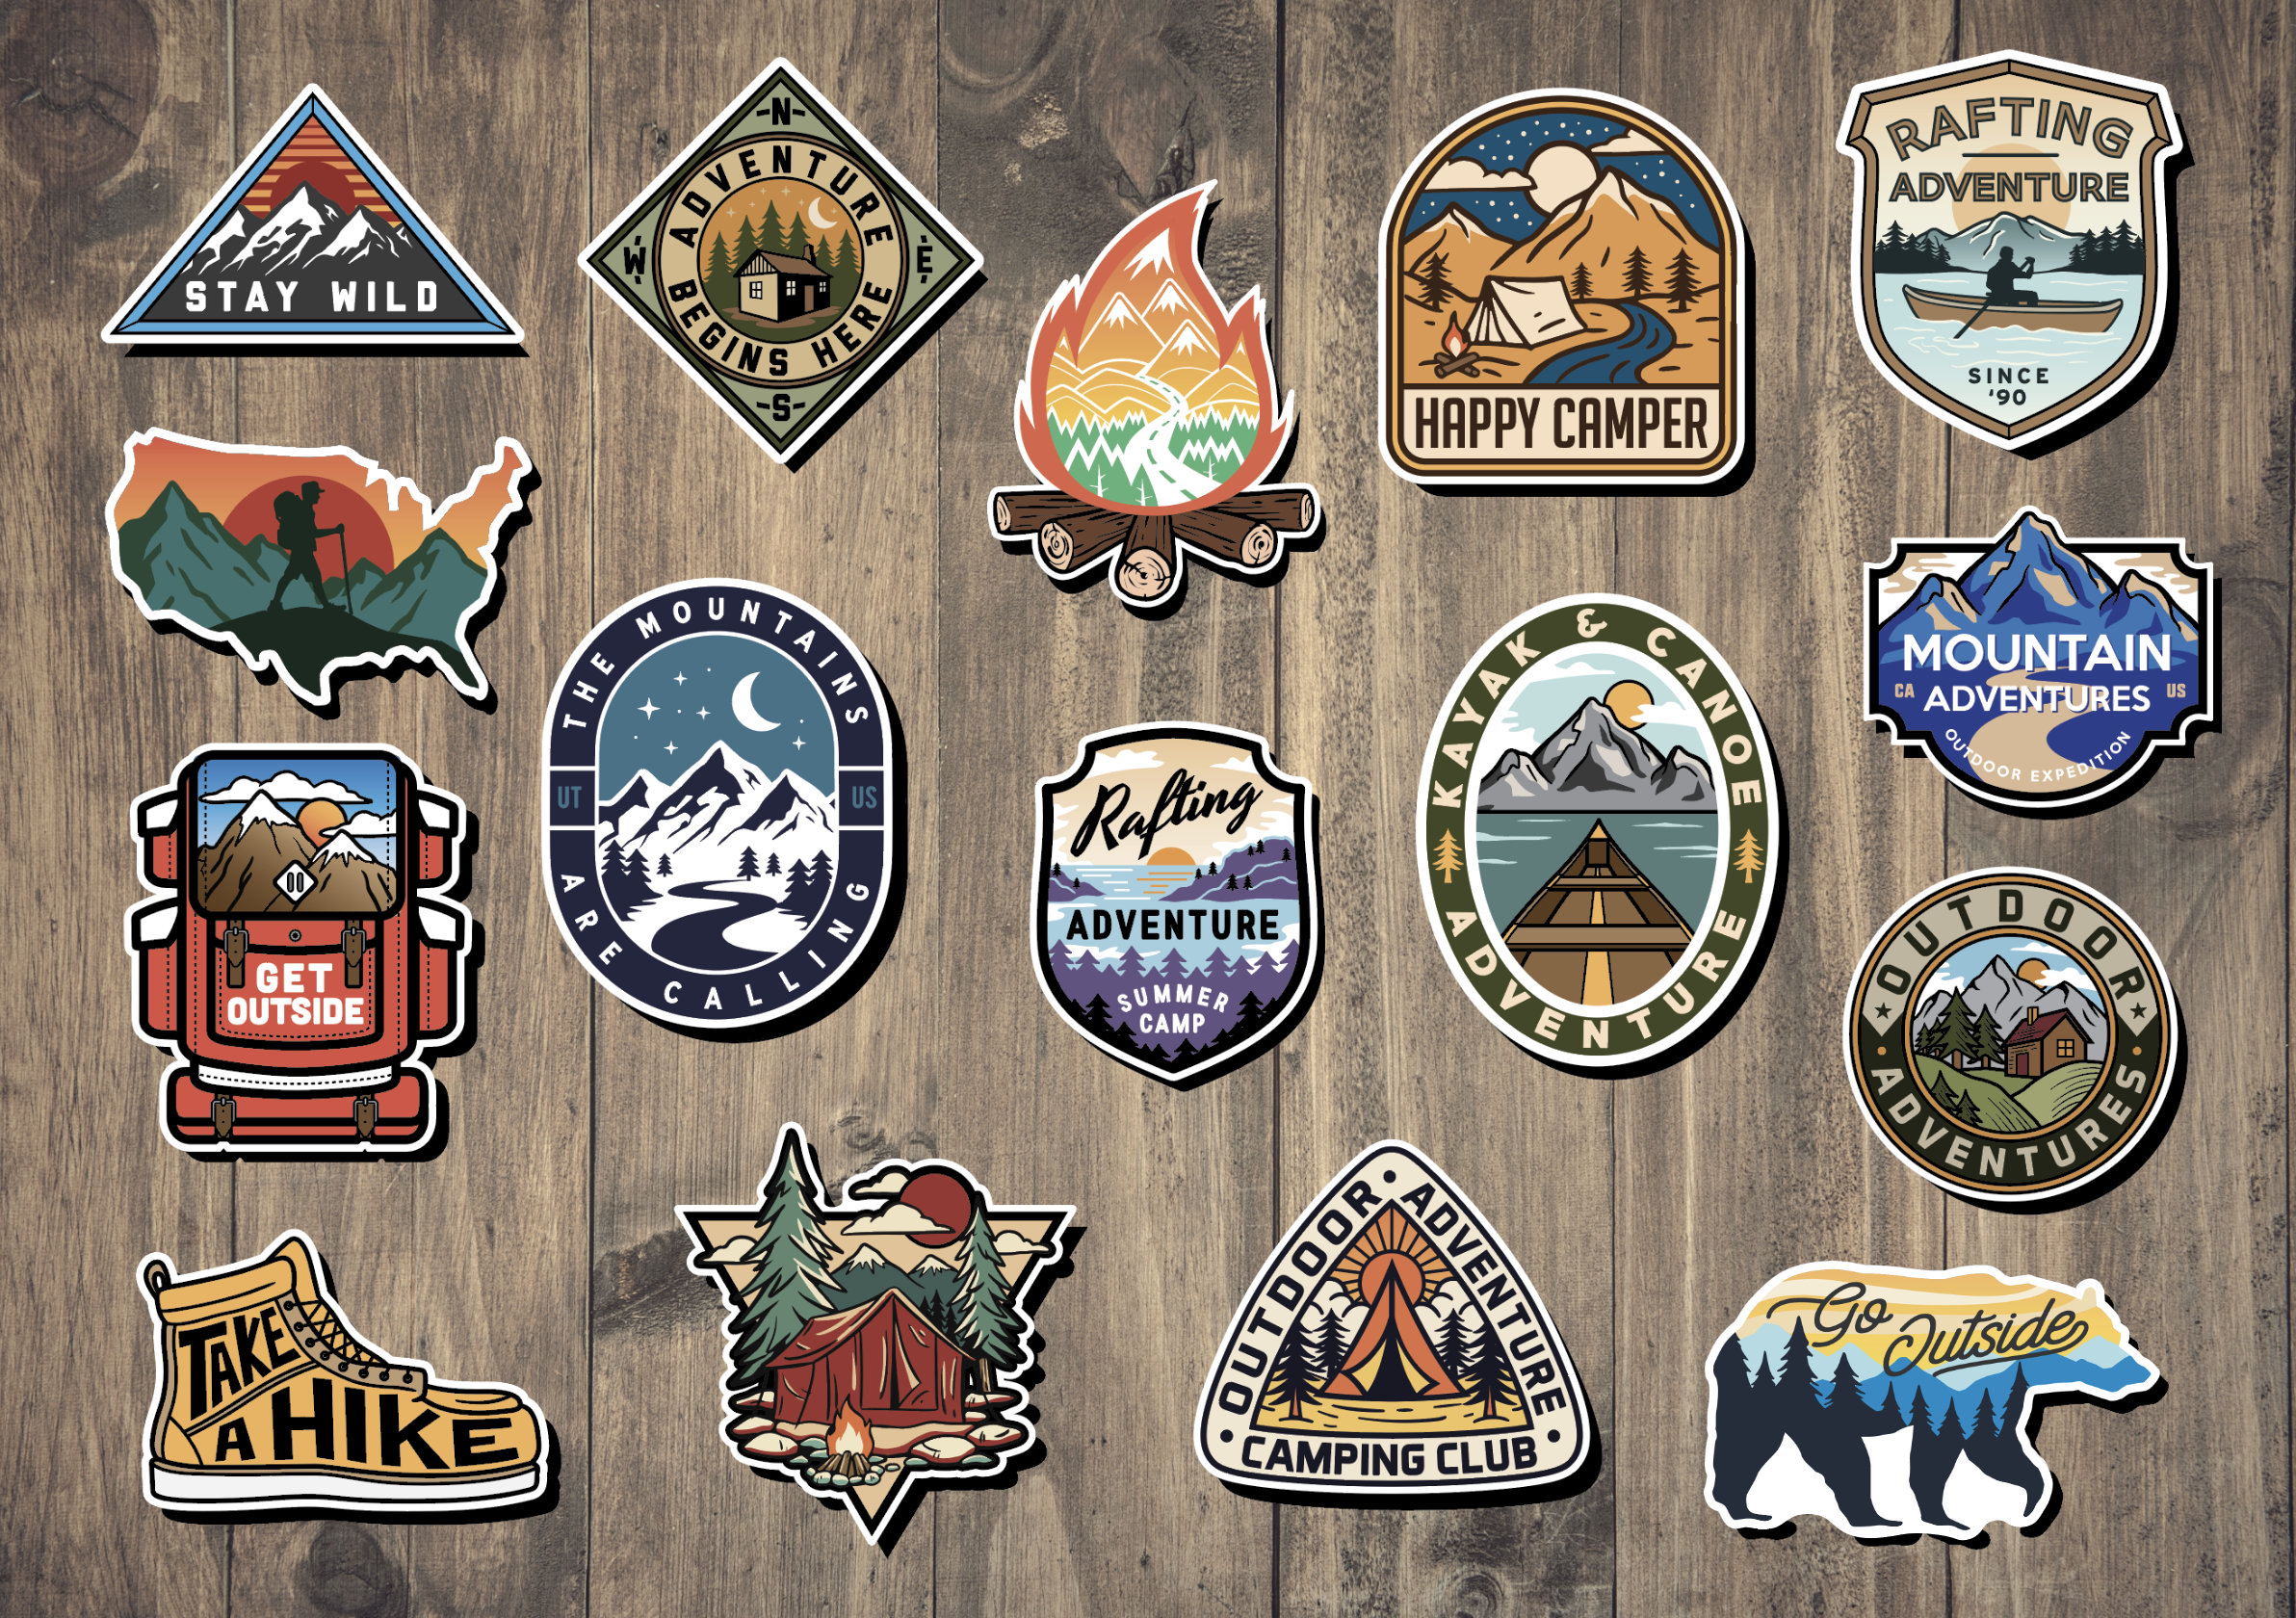 Adventure Nature Stickers (50 Pcs) Outdoor Sticker Pack Hiking, Camping, Travel, Wilderness, Adventure Stickers for Water Bottles, Car Decal